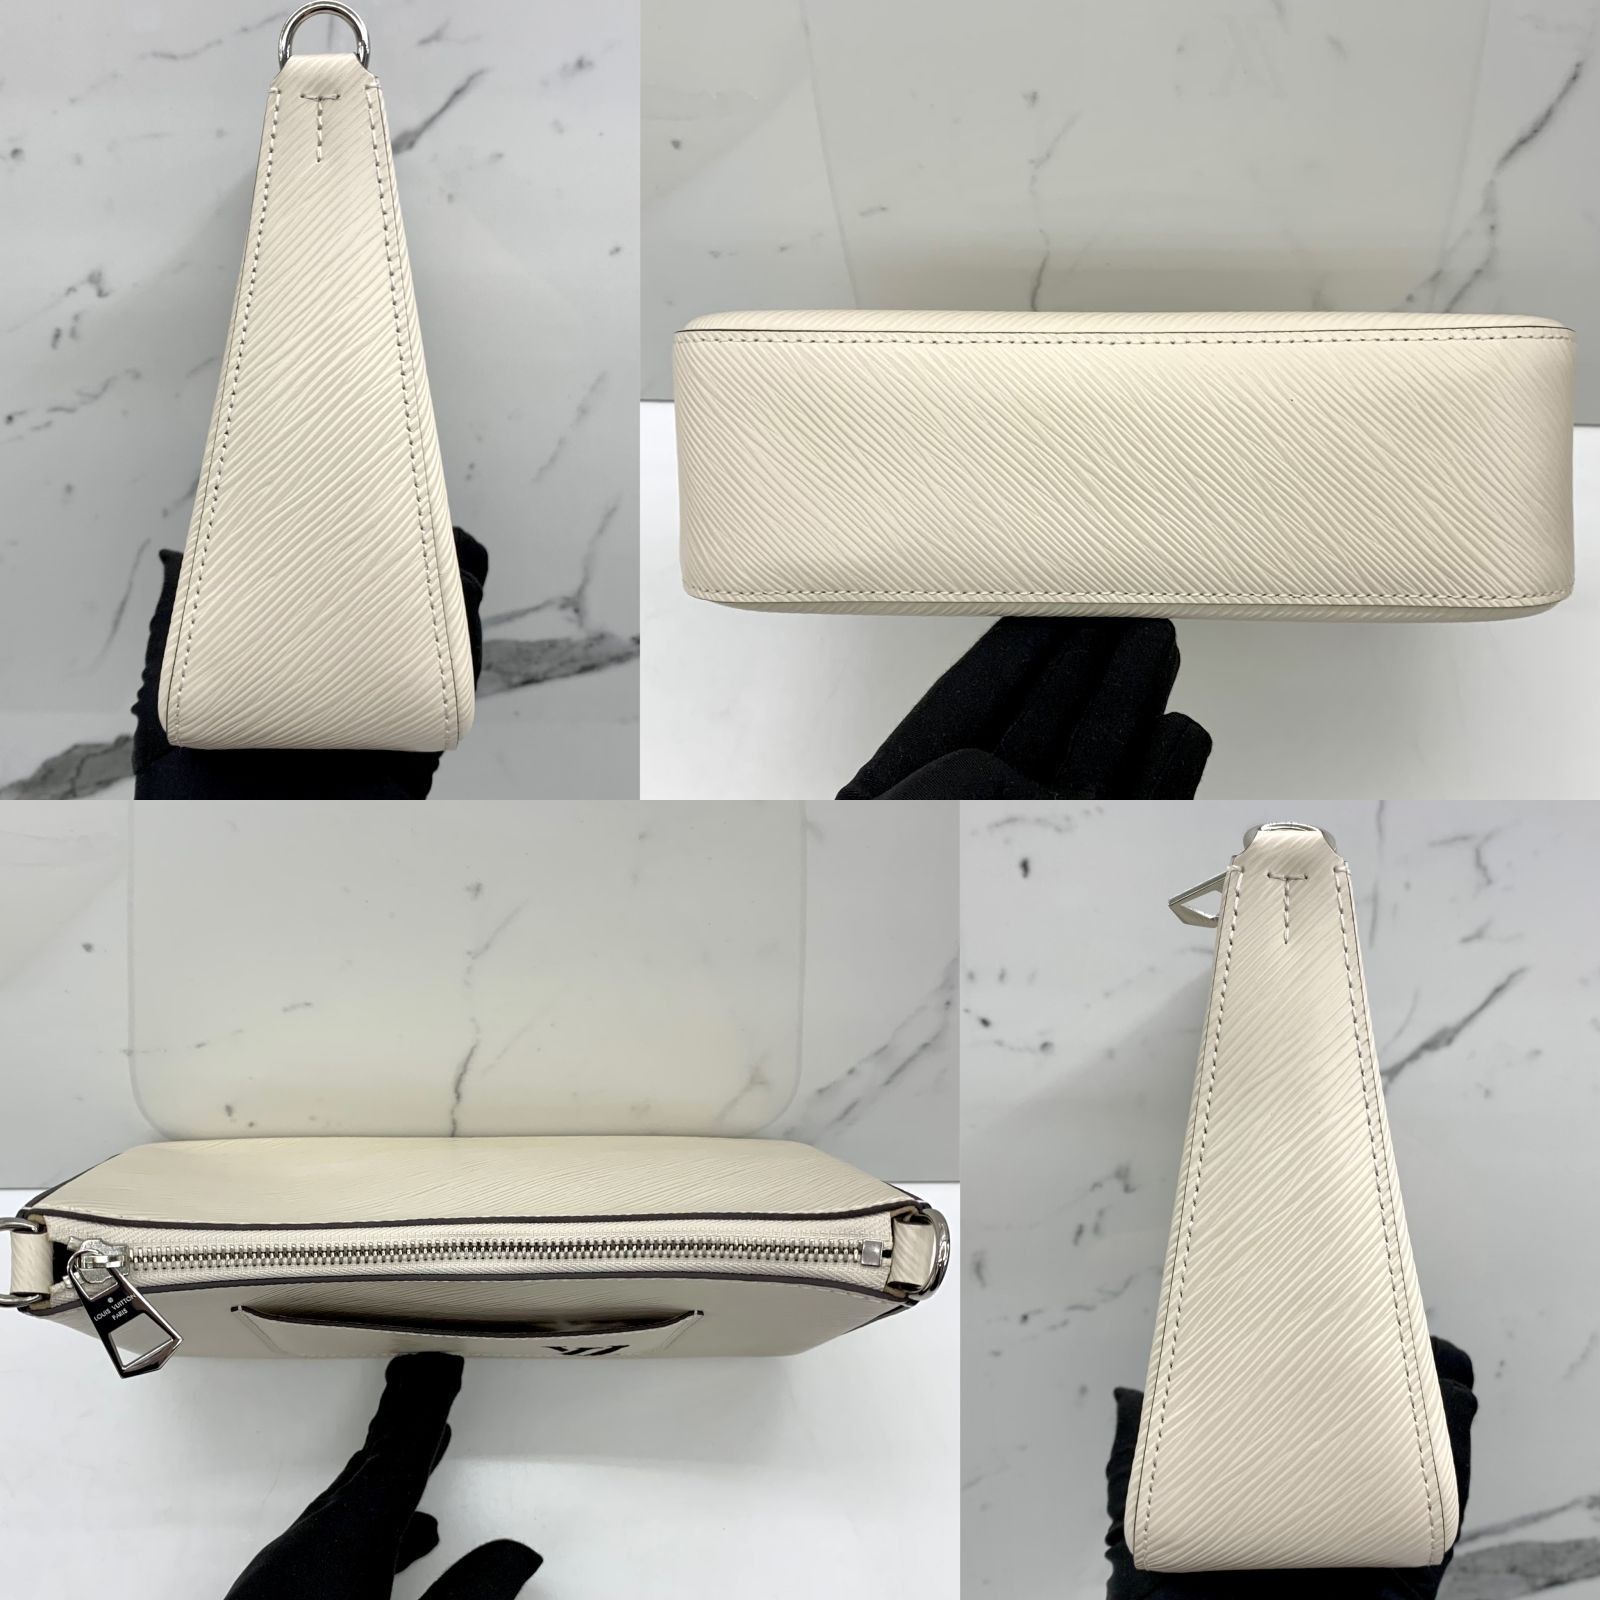 Marelle bag (M80688) opinions